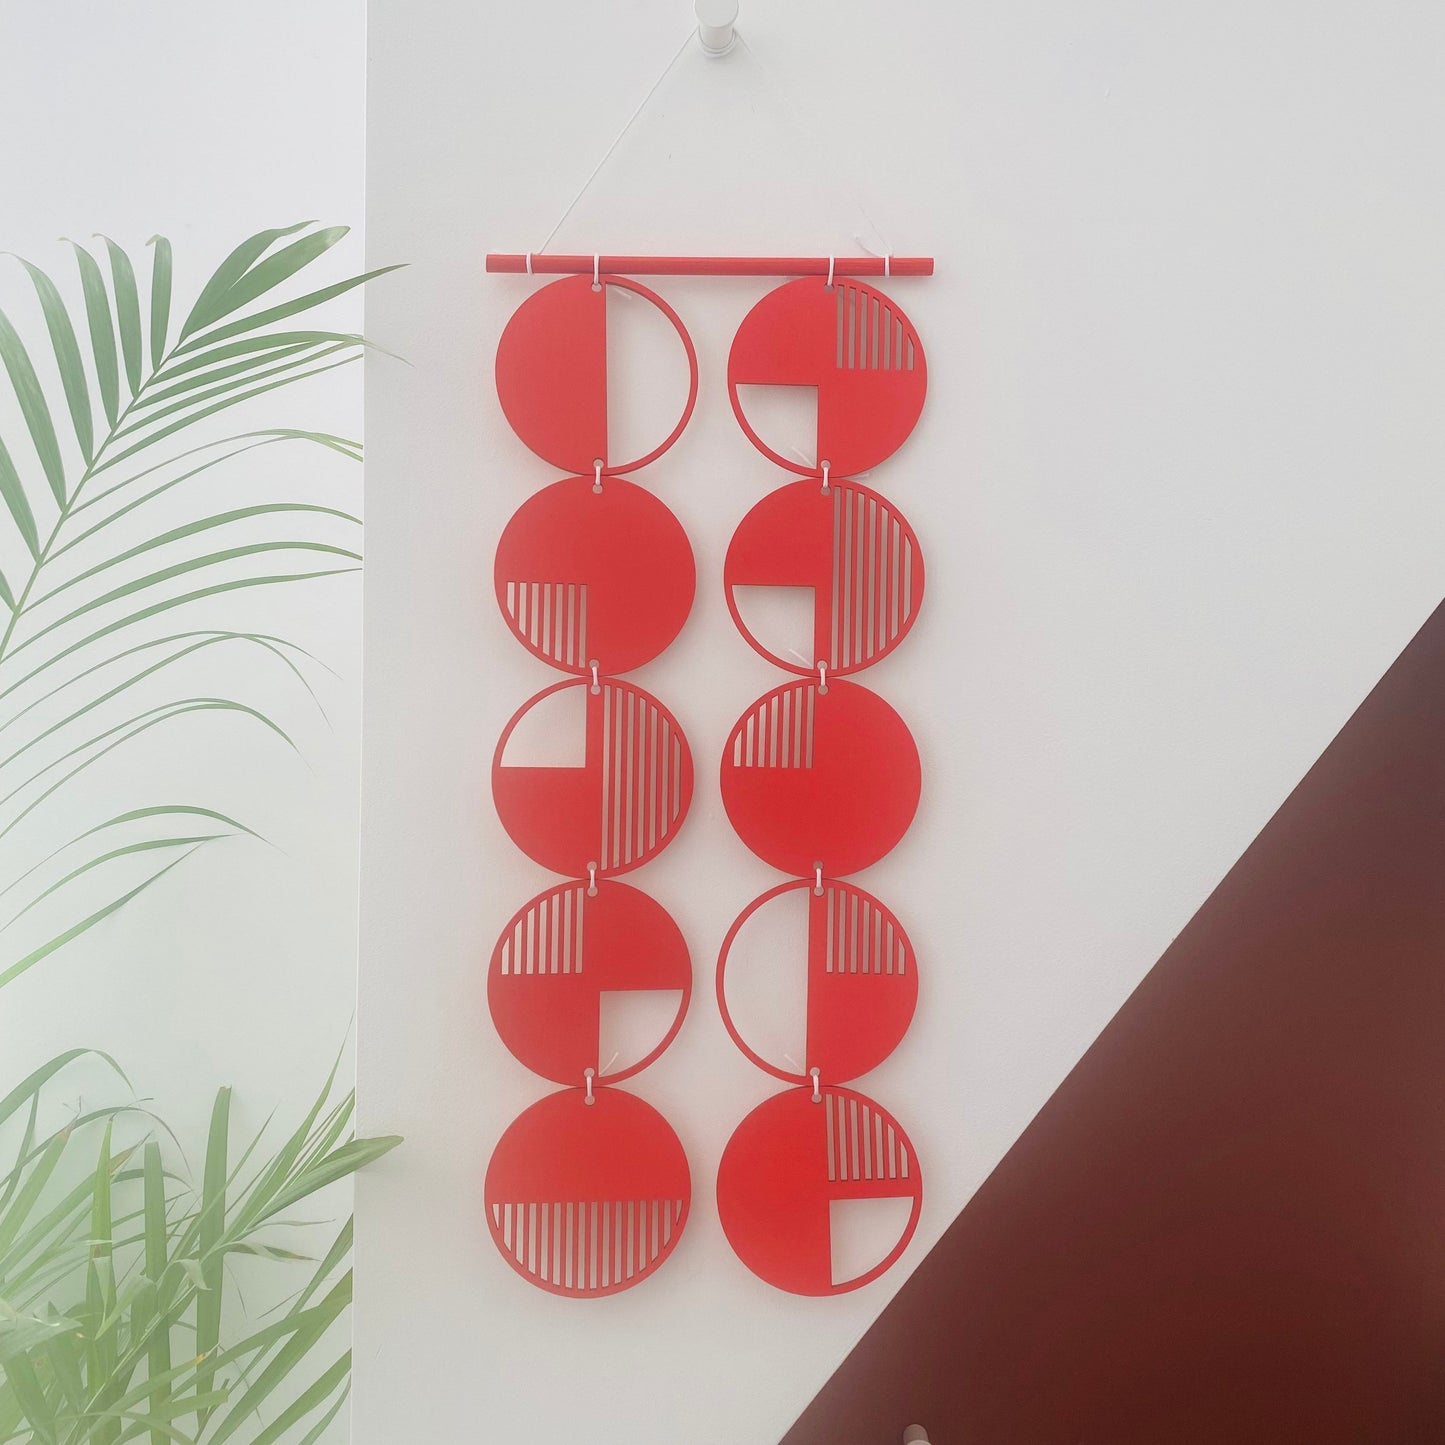 Red Wall hanging - Geometric Art - Plywood Decor - Monochrome Art - Bright Wall Hanging - Wall Art Decor - Red Cut Out Art